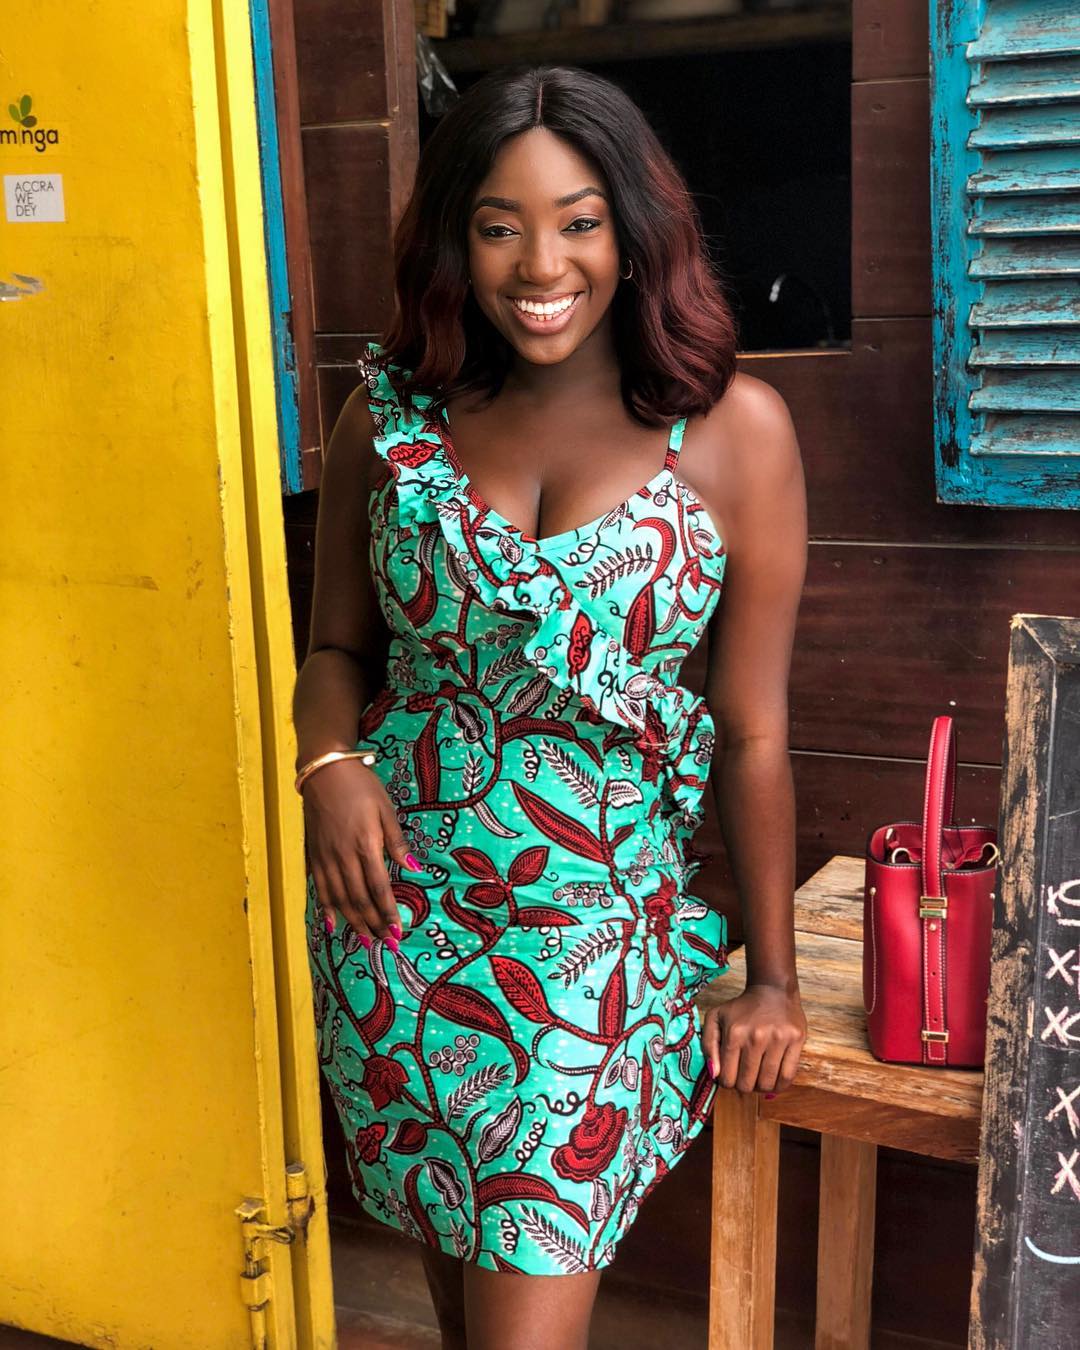 Did You See These Amazing Hot Ankara Looks?